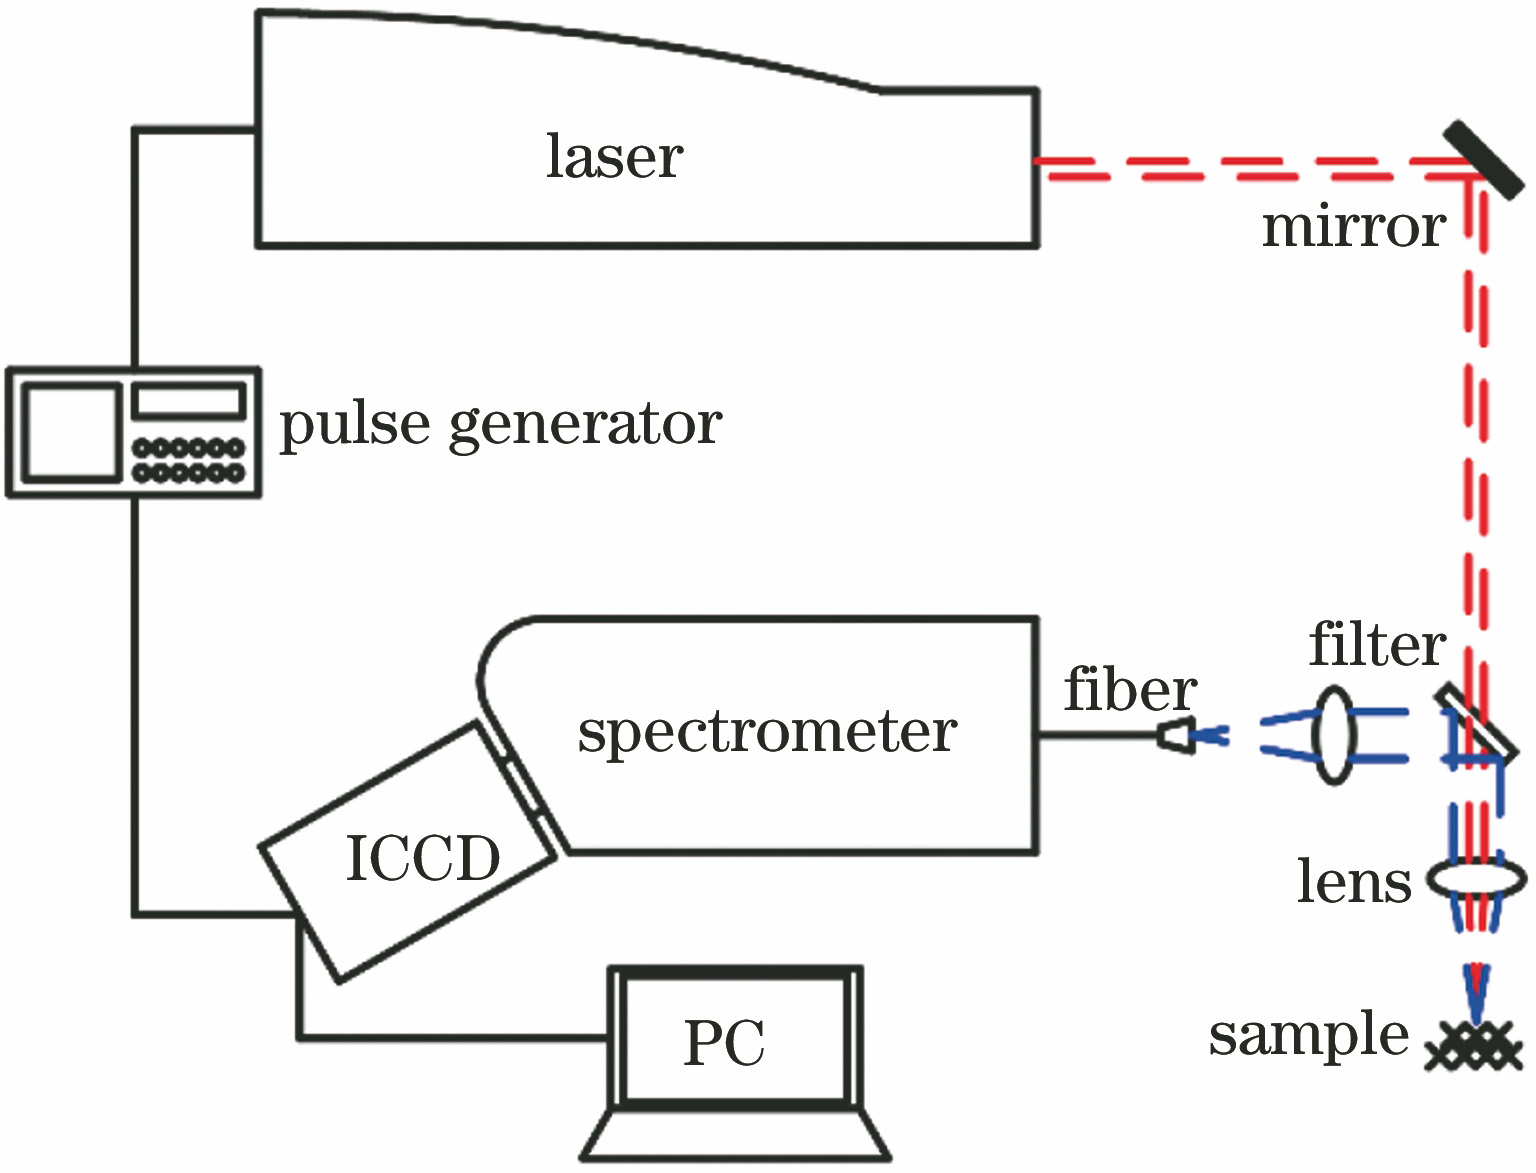 Schematic of LIBS experimental system